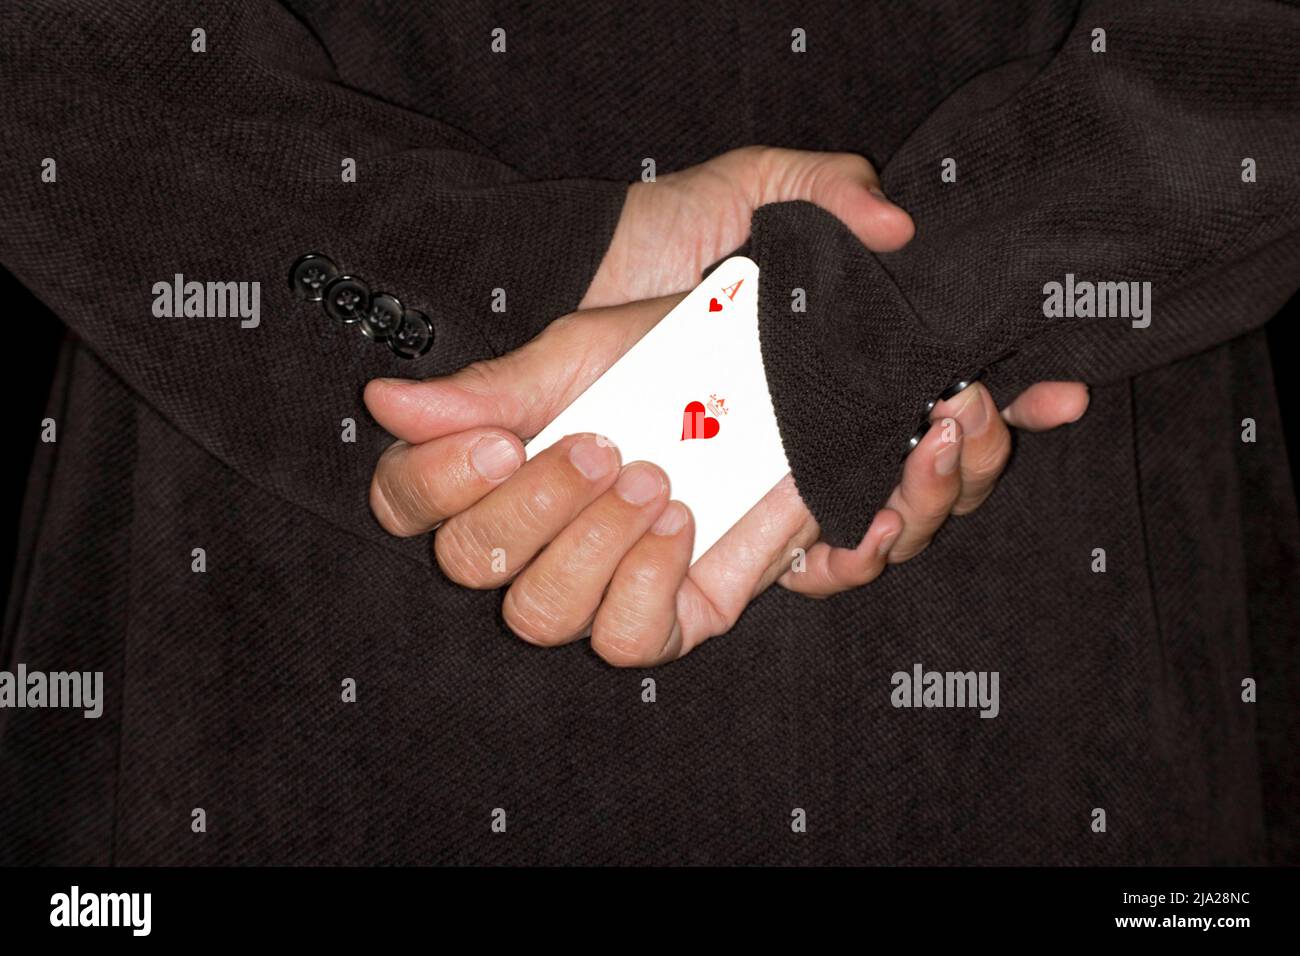 Playing card, cheating, symbol cheating, symbol image for another ace of hearts up your sleeve Stock Photo